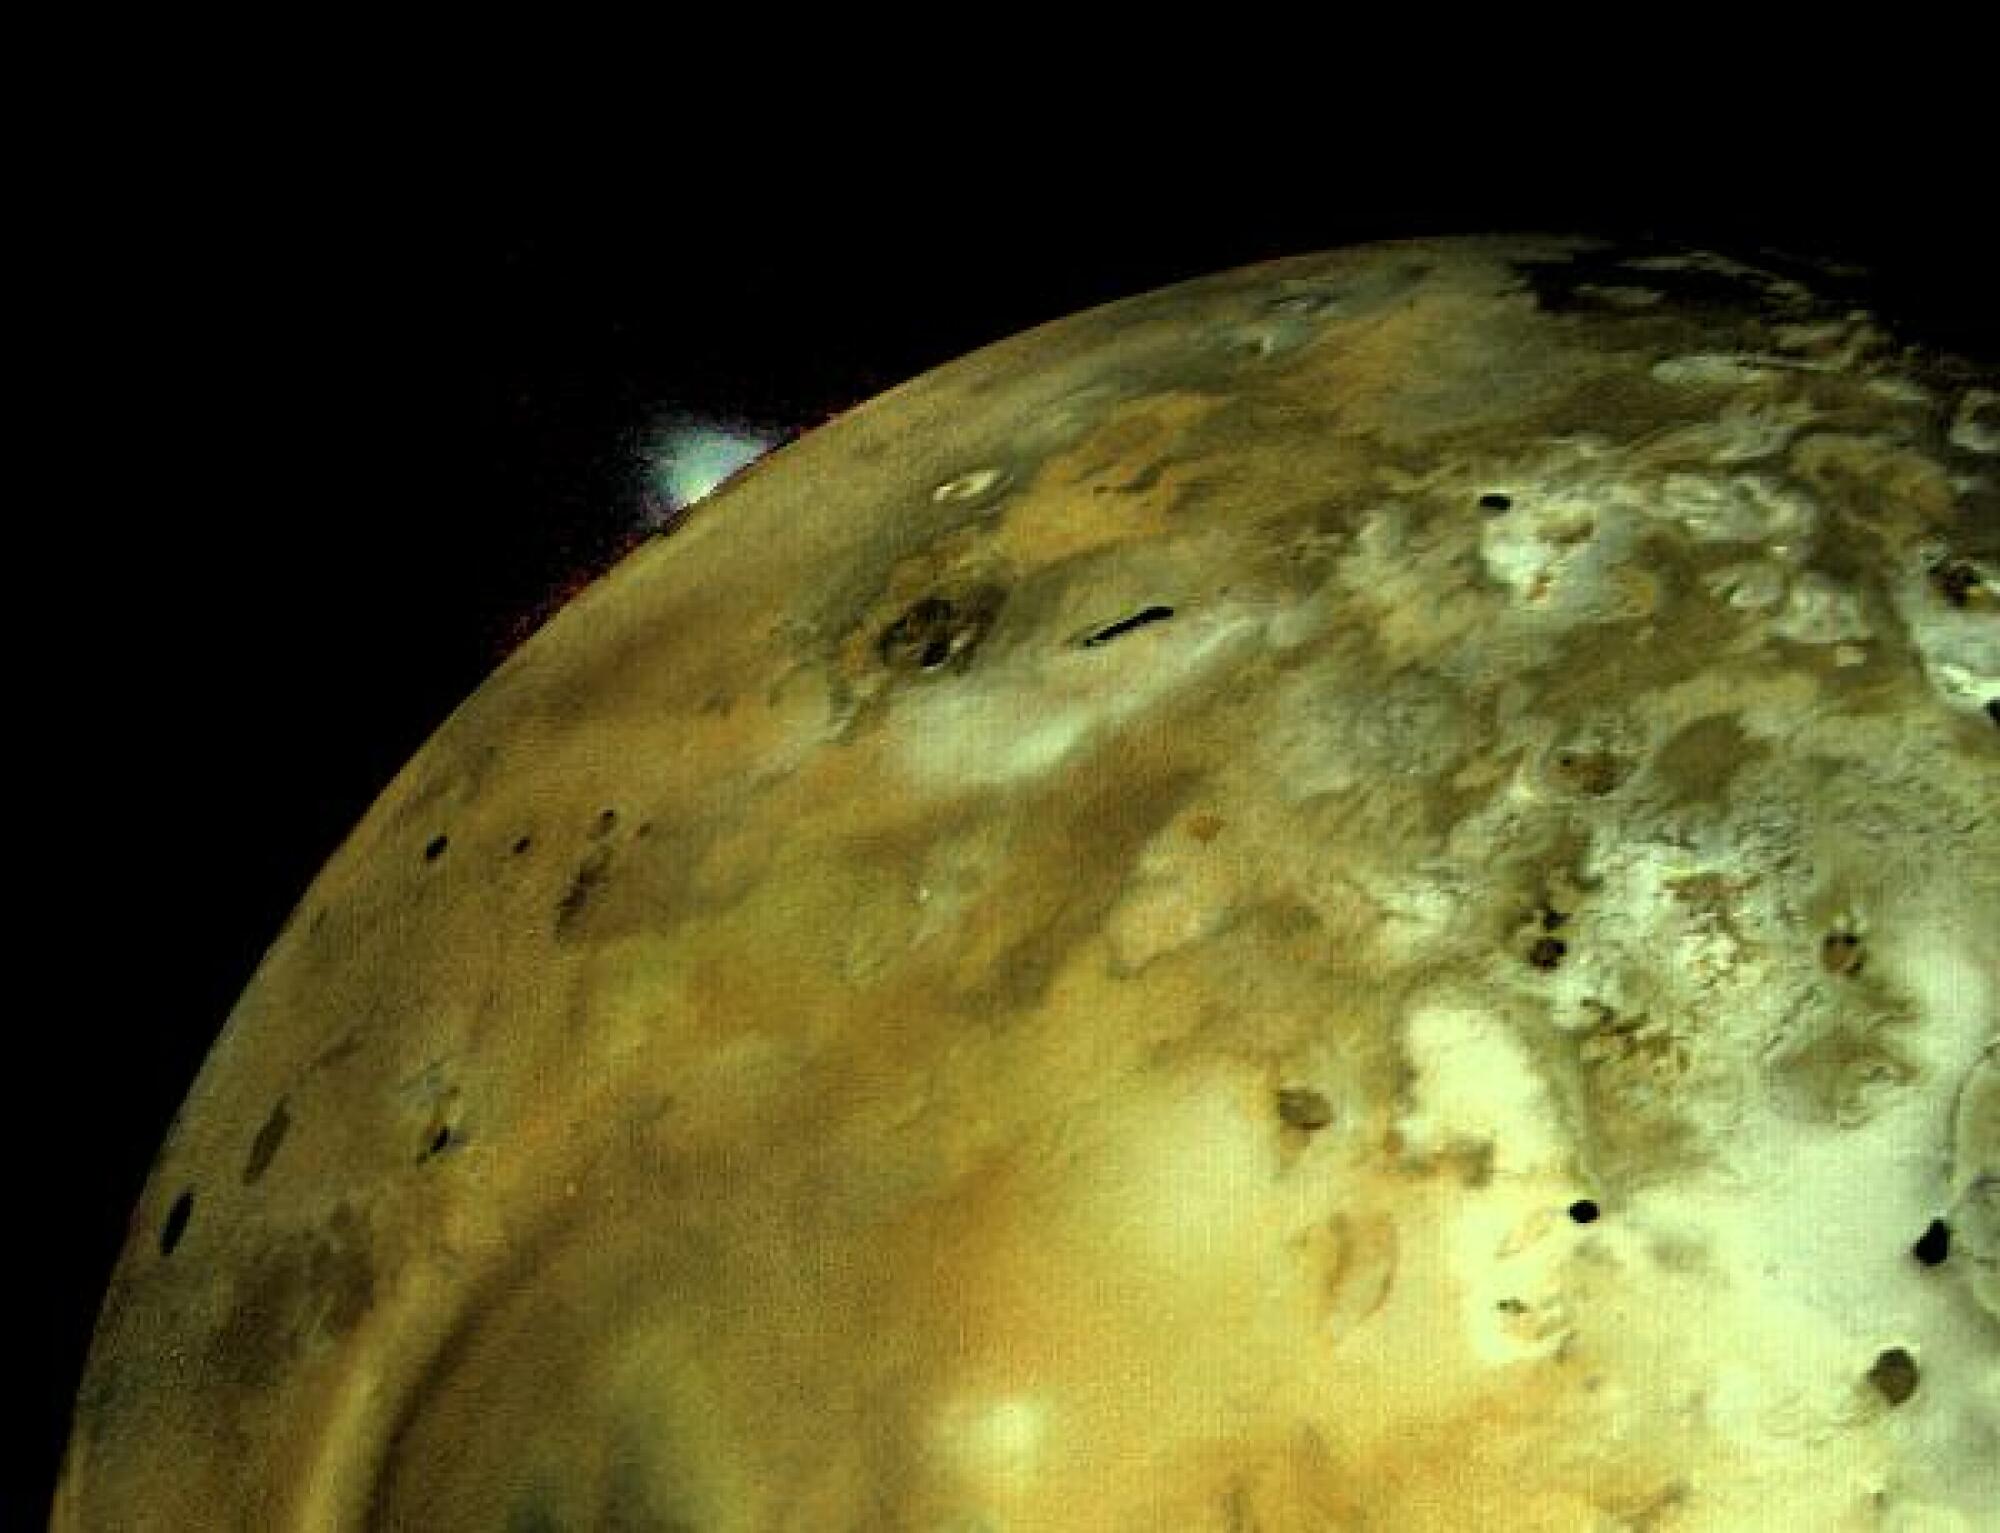 Voyager 1 captured this image of Io on March 4, 1979. A volcano is seen erupting on the moon's surface.